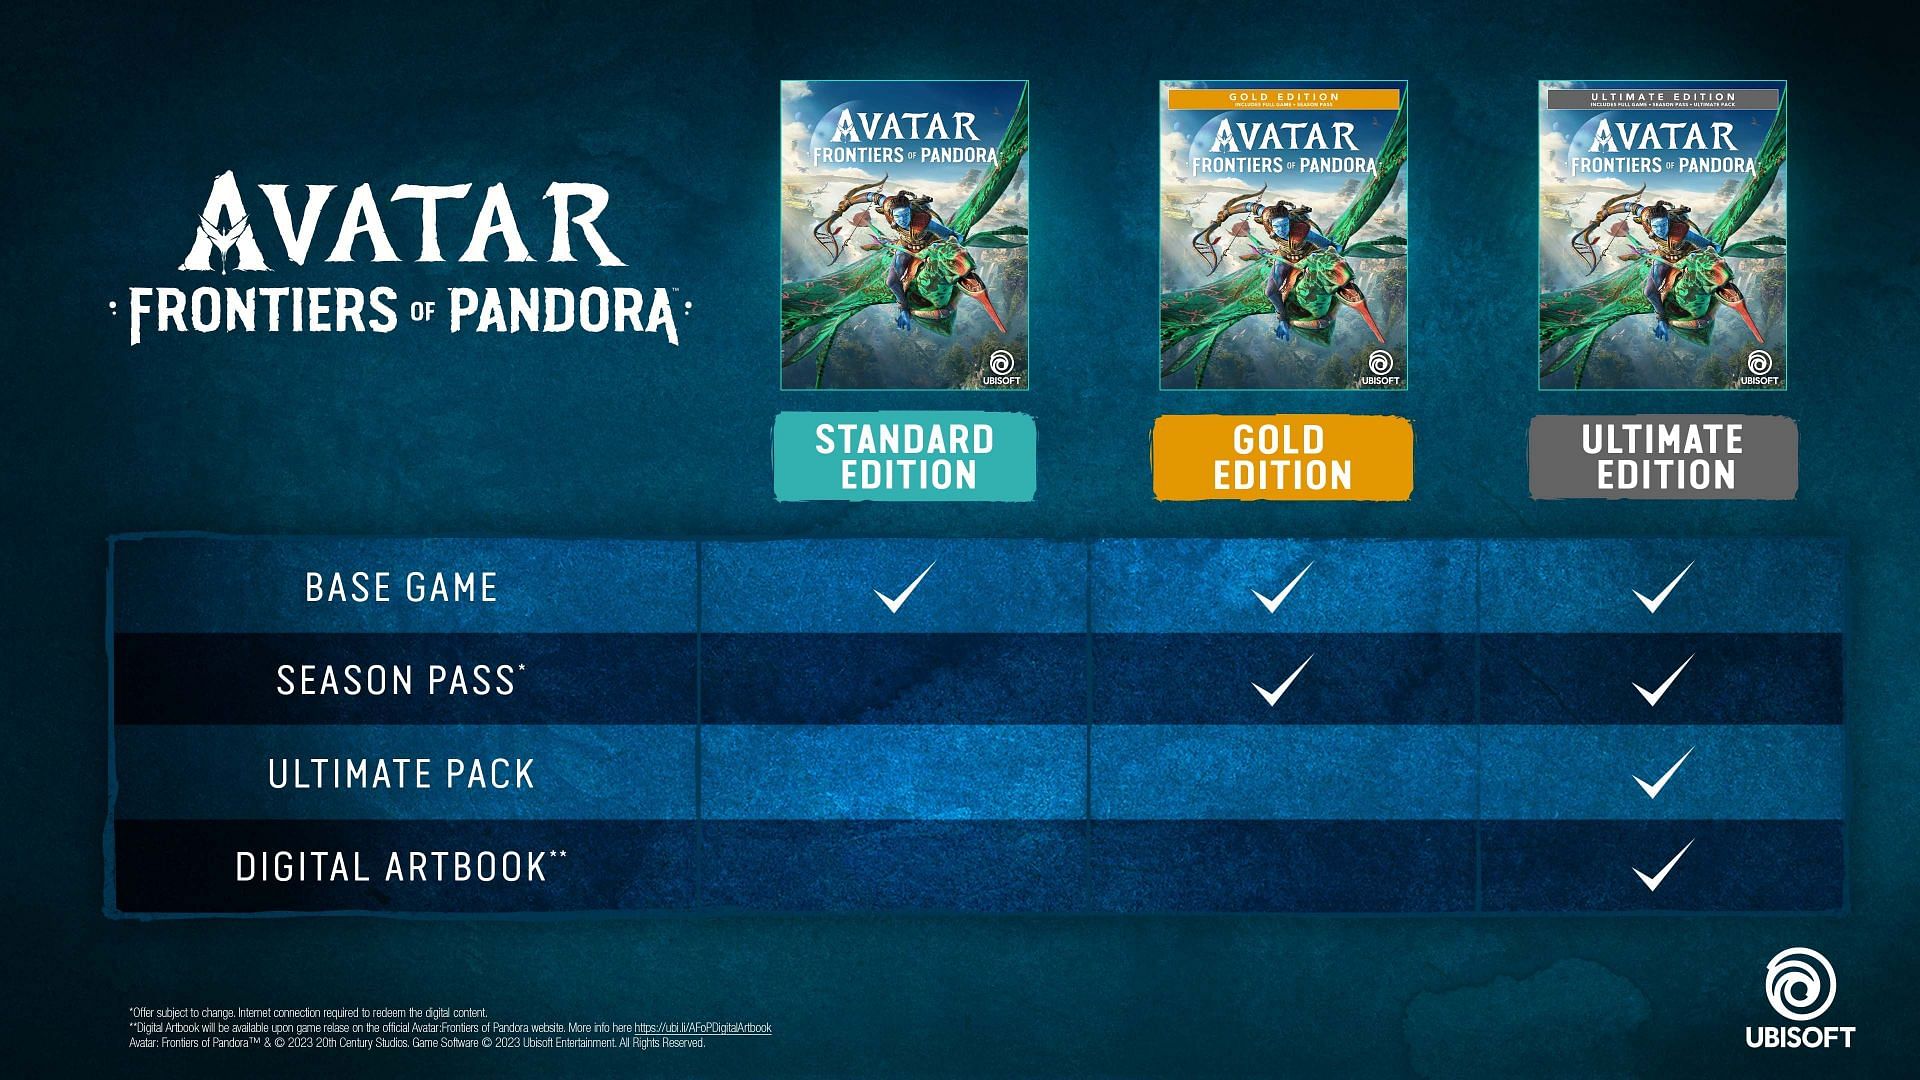 Standard, Gold, and Ultimate Editions (Image via Ubisoft)